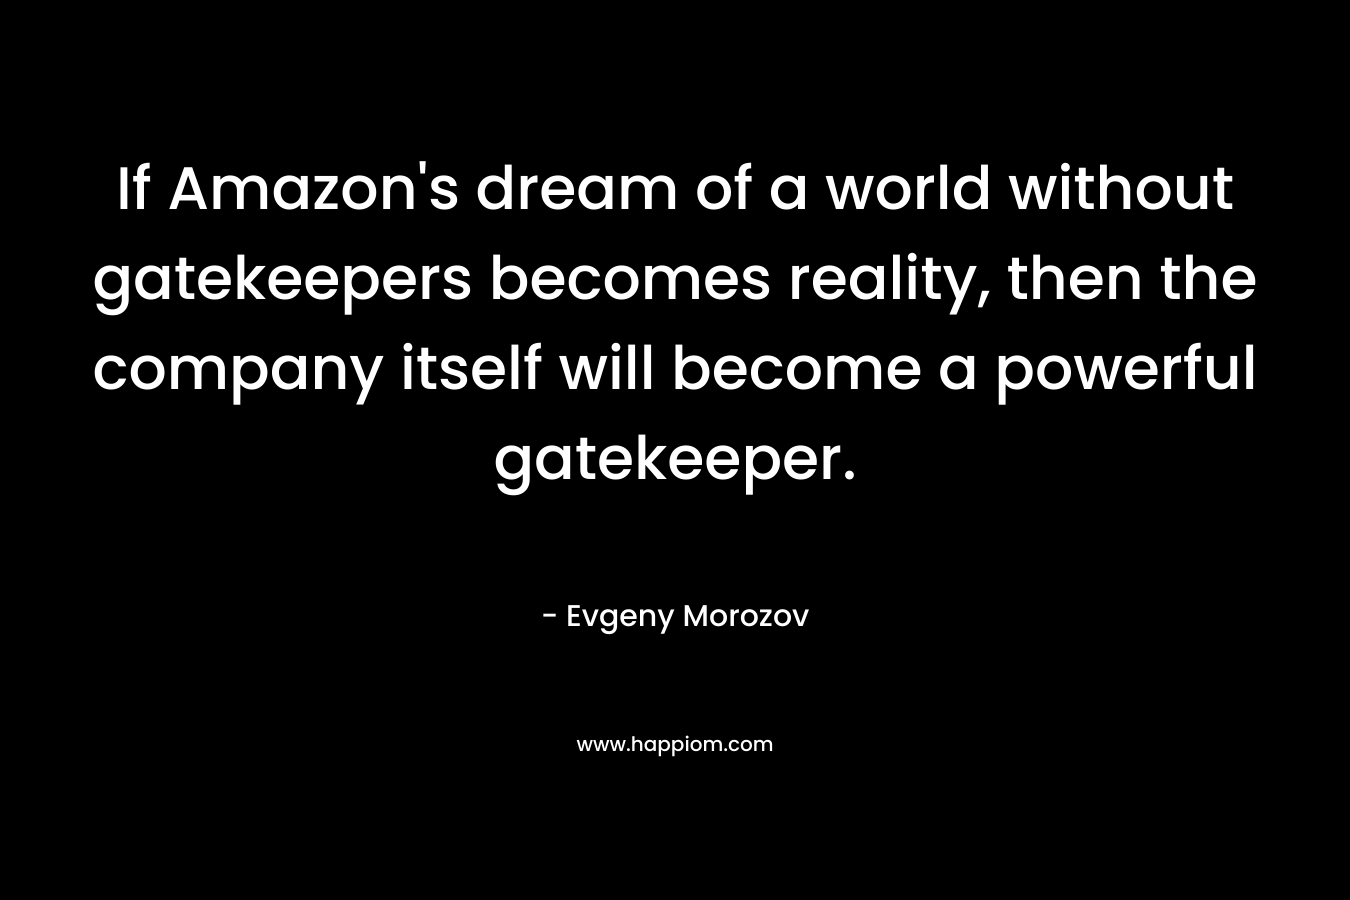 If Amazon’s dream of a world without gatekeepers becomes reality, then the company itself will become a powerful gatekeeper. – Evgeny Morozov